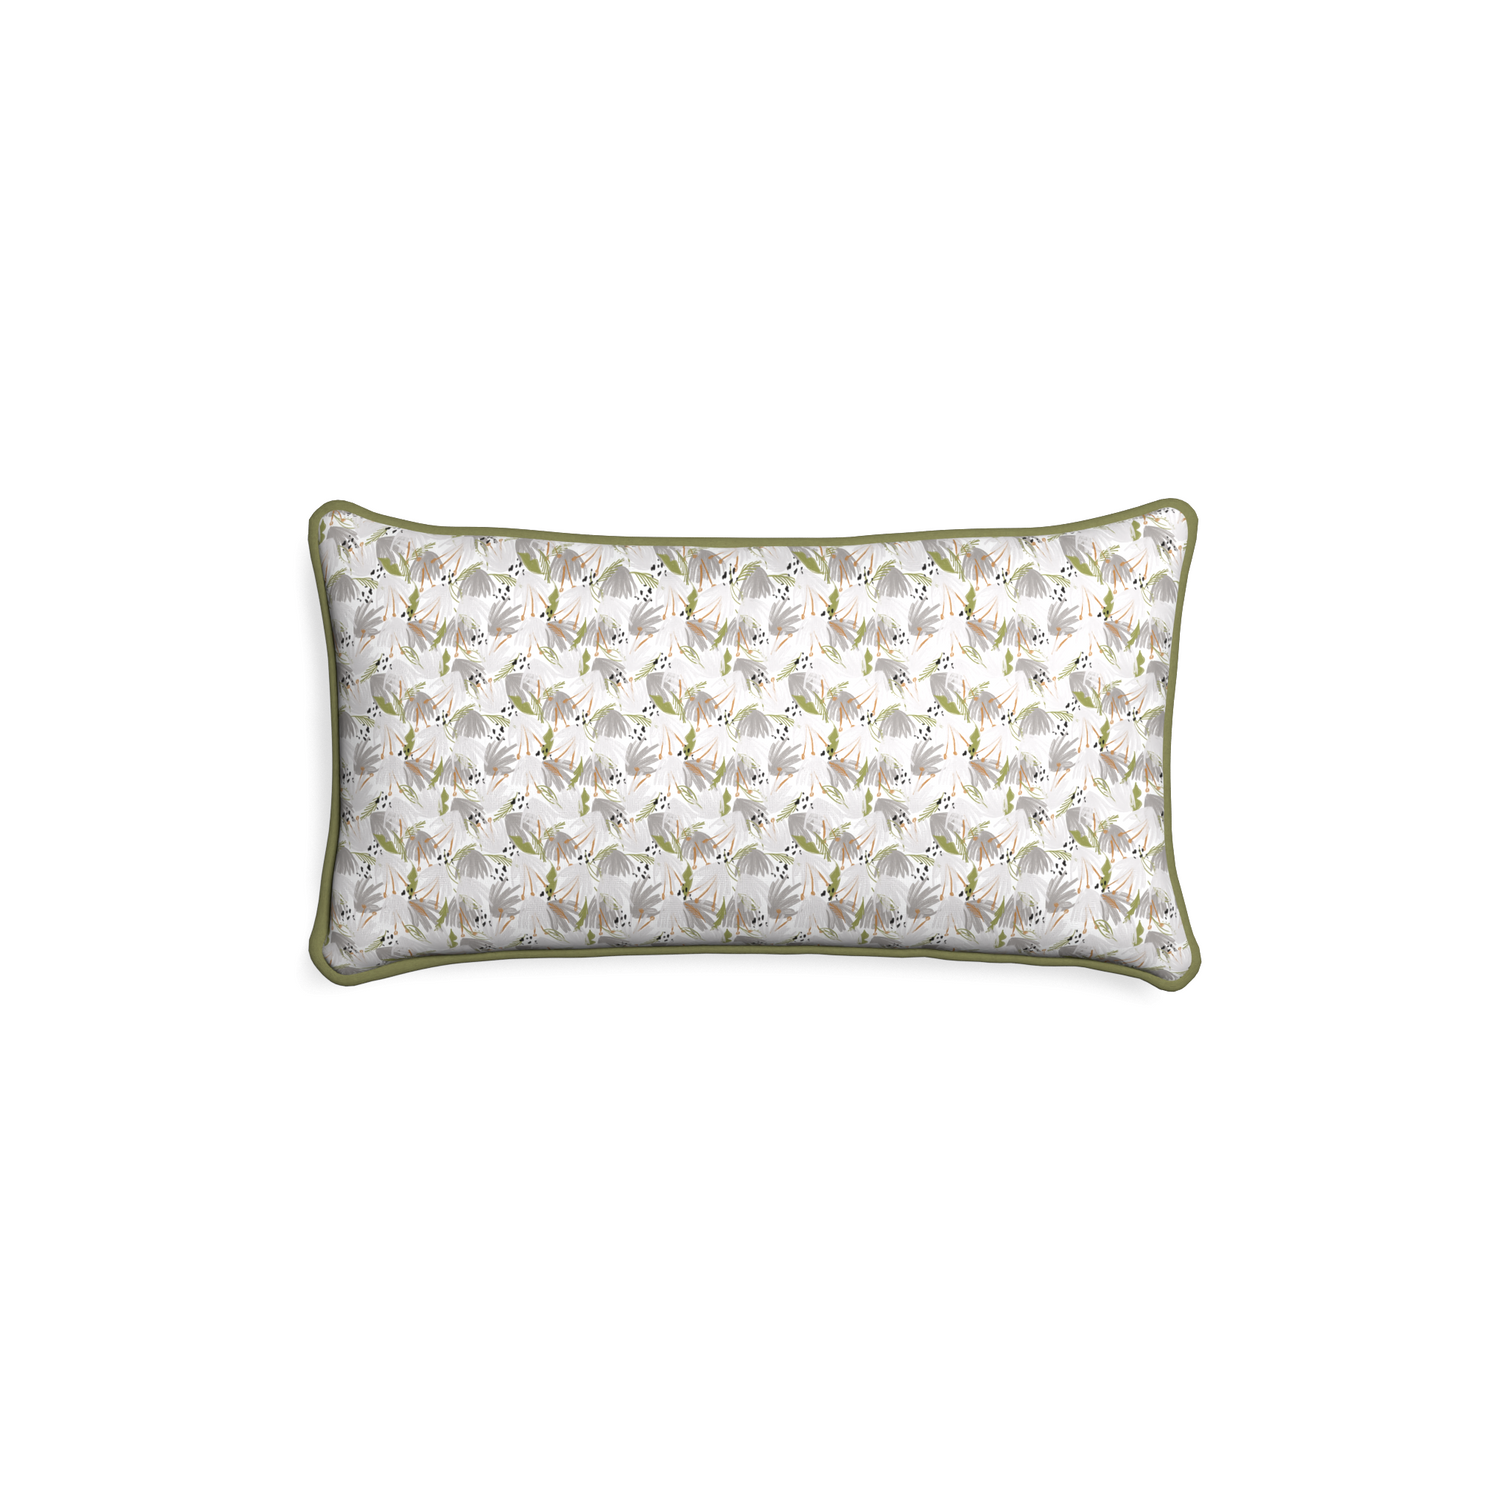 rectangle grey floral pillow with moss green piping